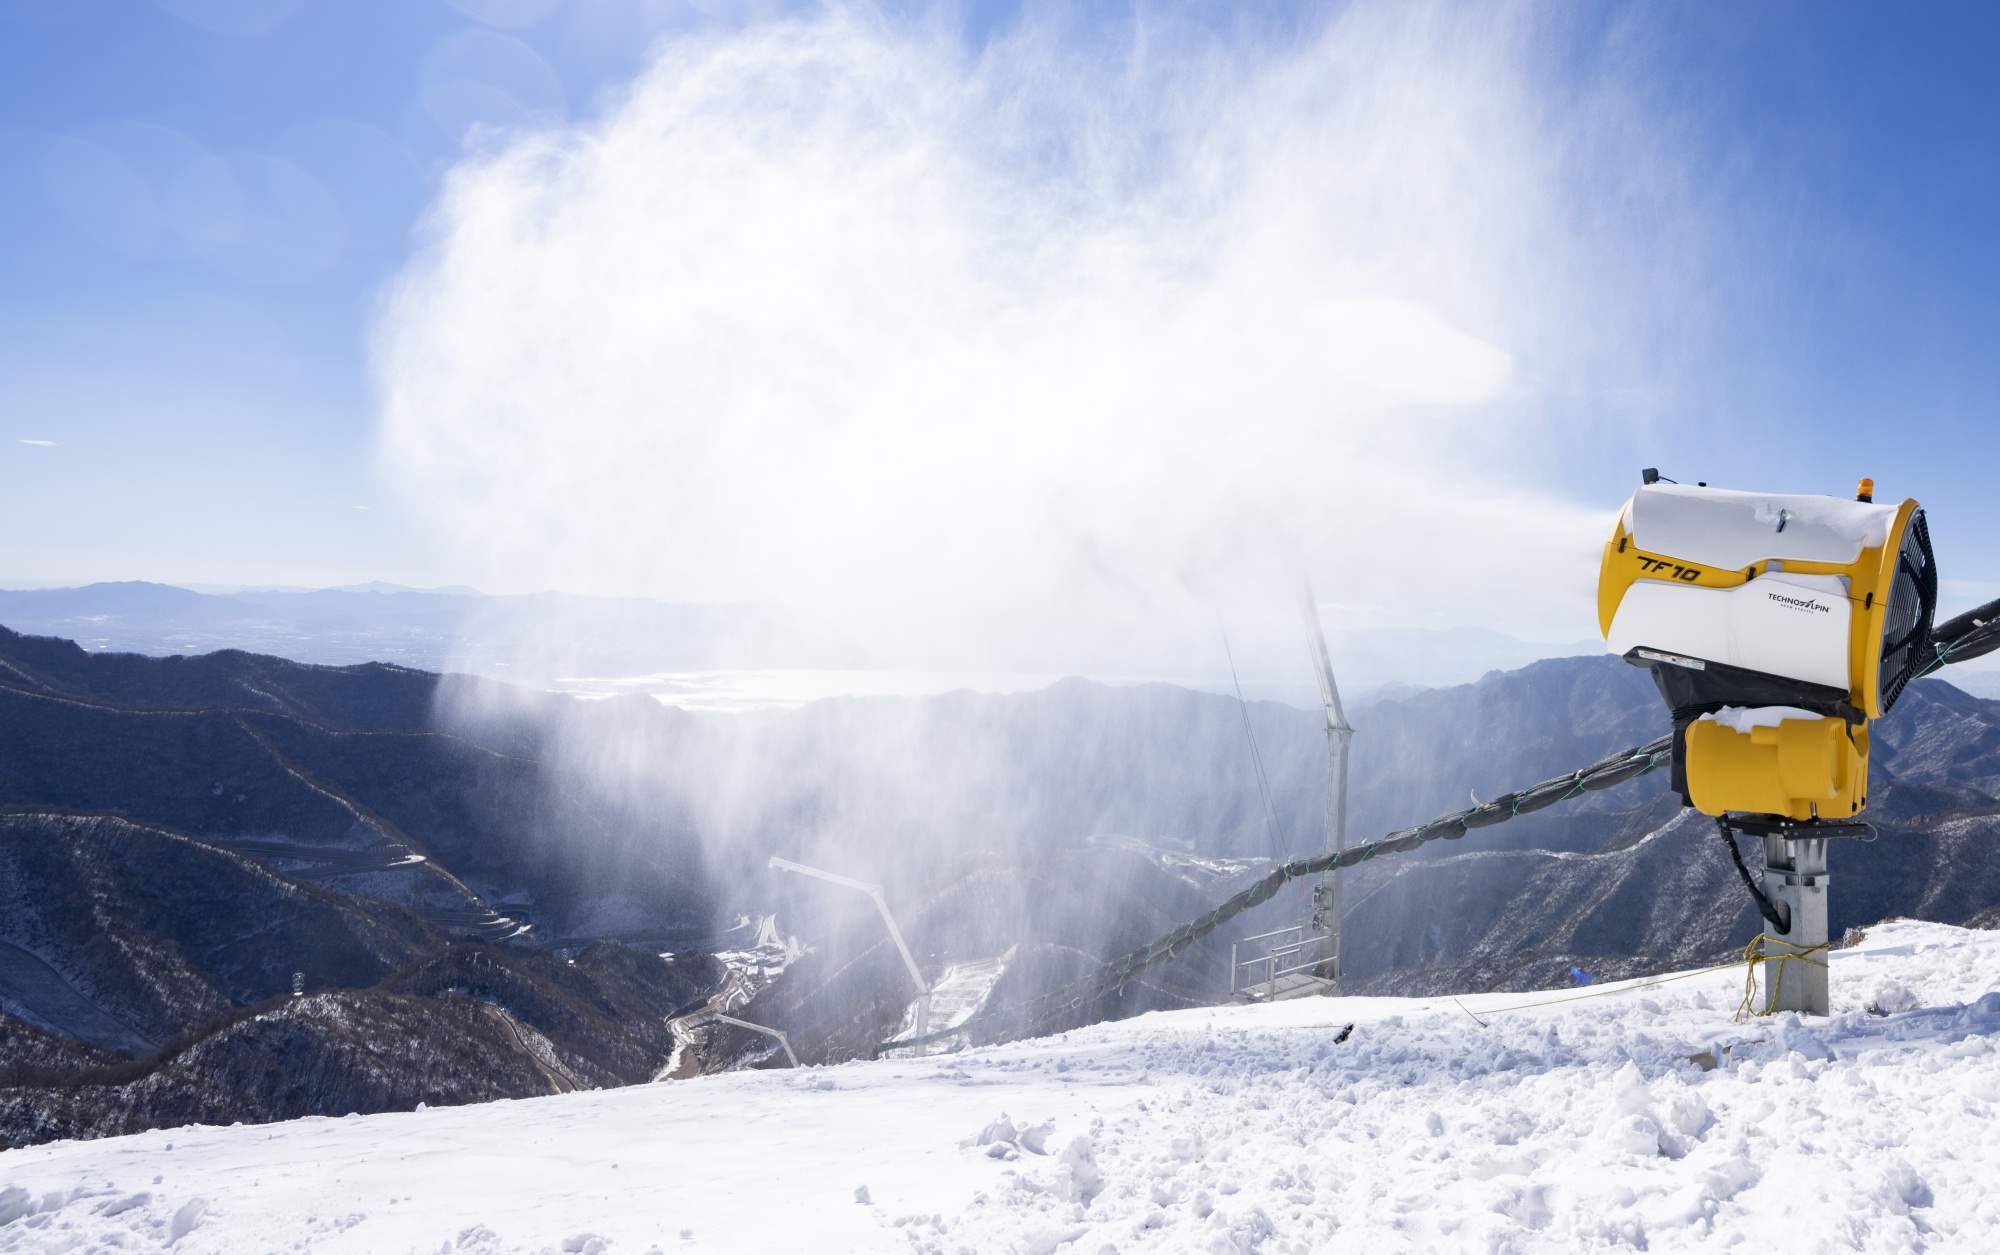 How artificial snow is made - Artificial snowmaking with snow cannons